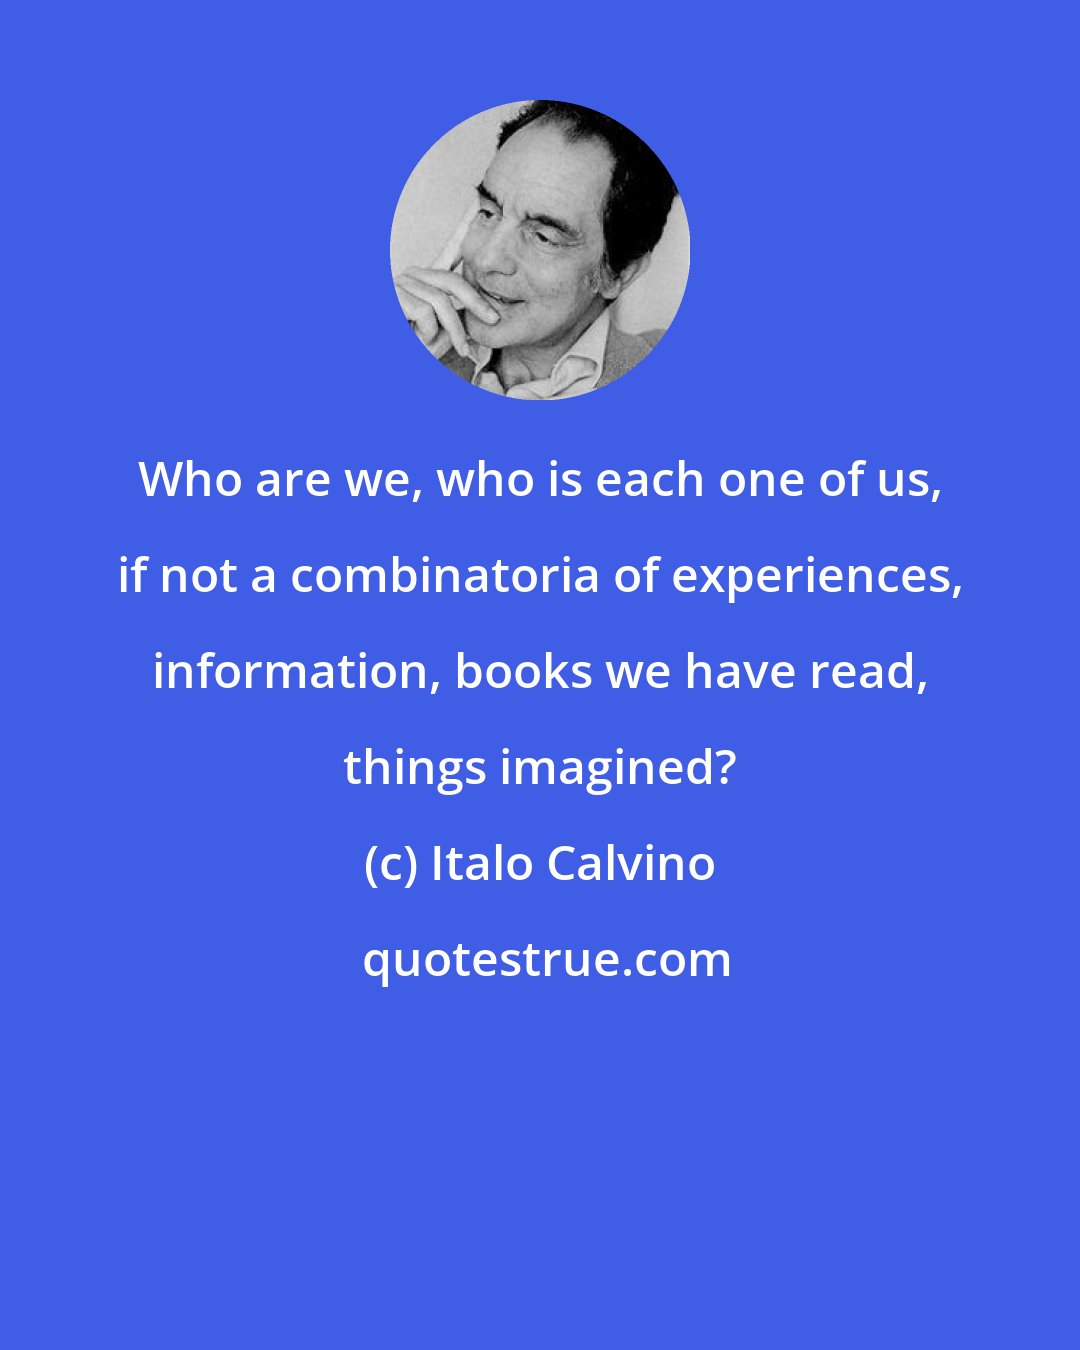 Italo Calvino: Who are we, who is each one of us, if not a combinatoria of experiences, information, books we have read, things imagined?